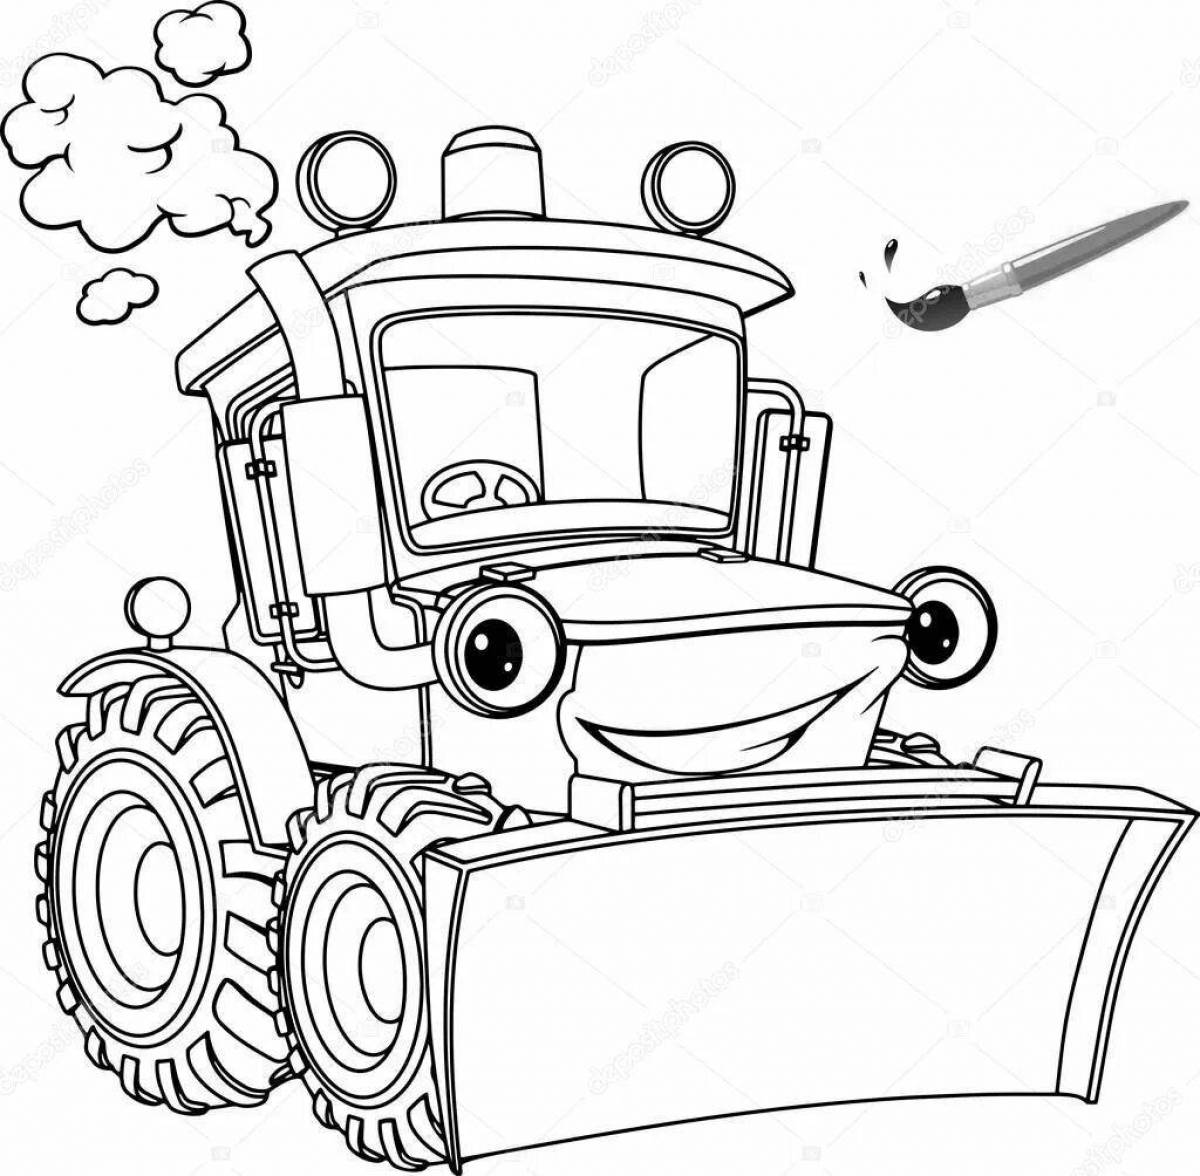 Cute cat and blue tractor coloring page